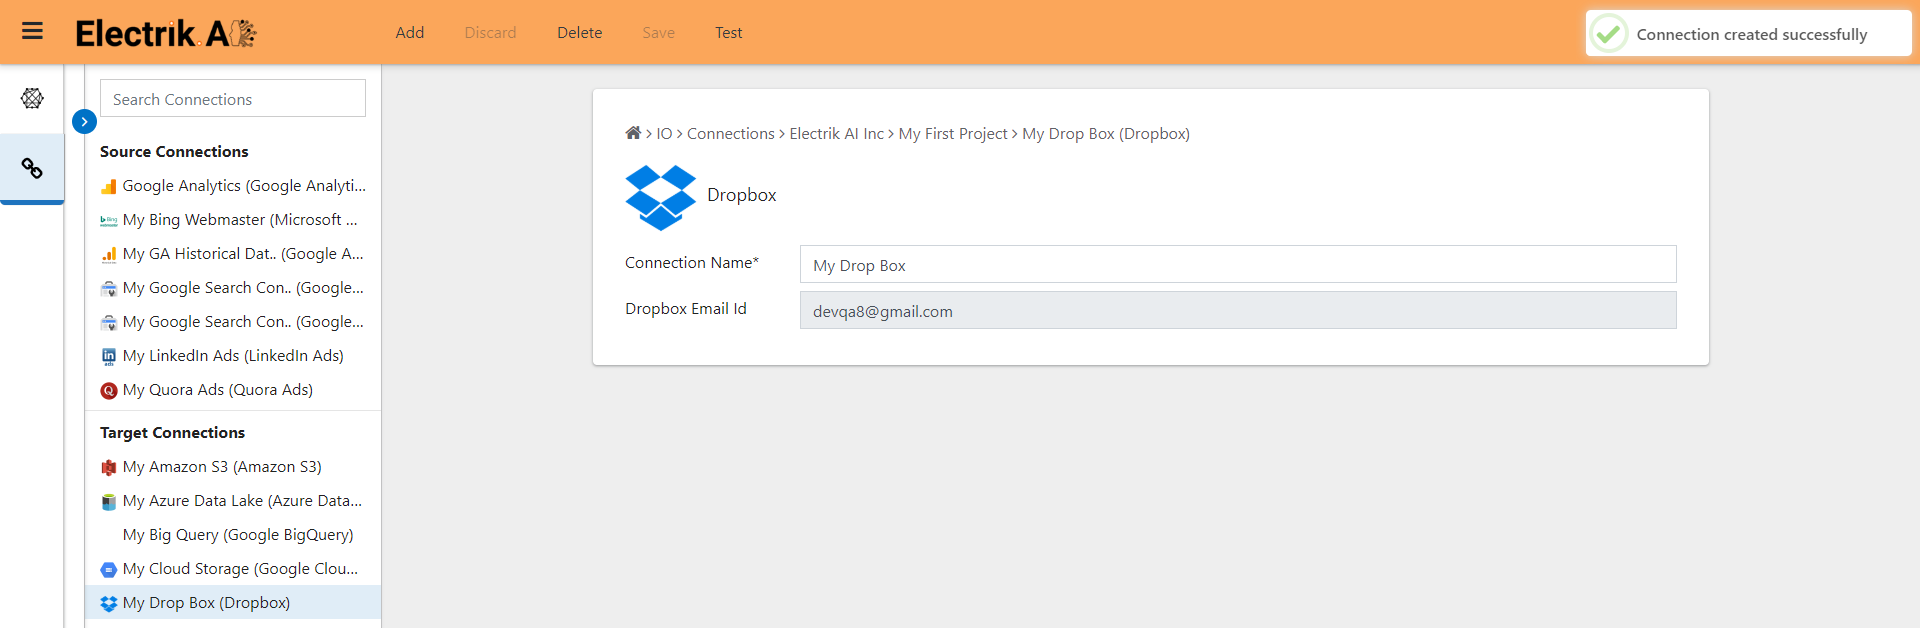 Successfully created a Dropbox connection in Electrik.AI